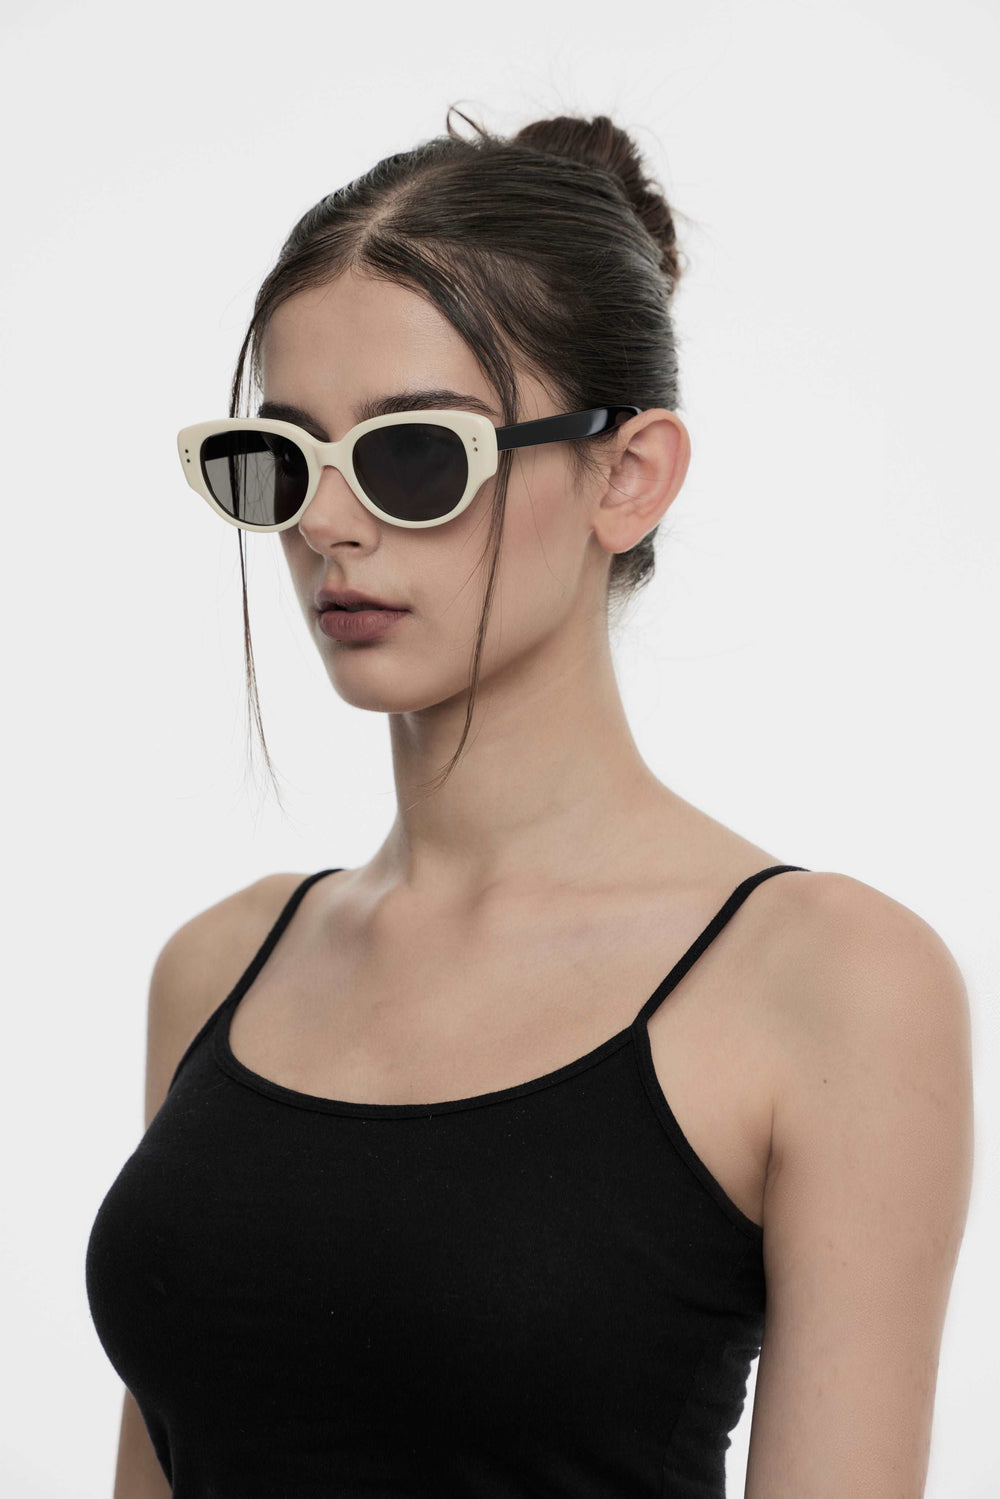 Model showcasing side view of Lust Korean Fashion Panda in black&white round Sunglasses from Mercury Retrograde's Daydream Collection